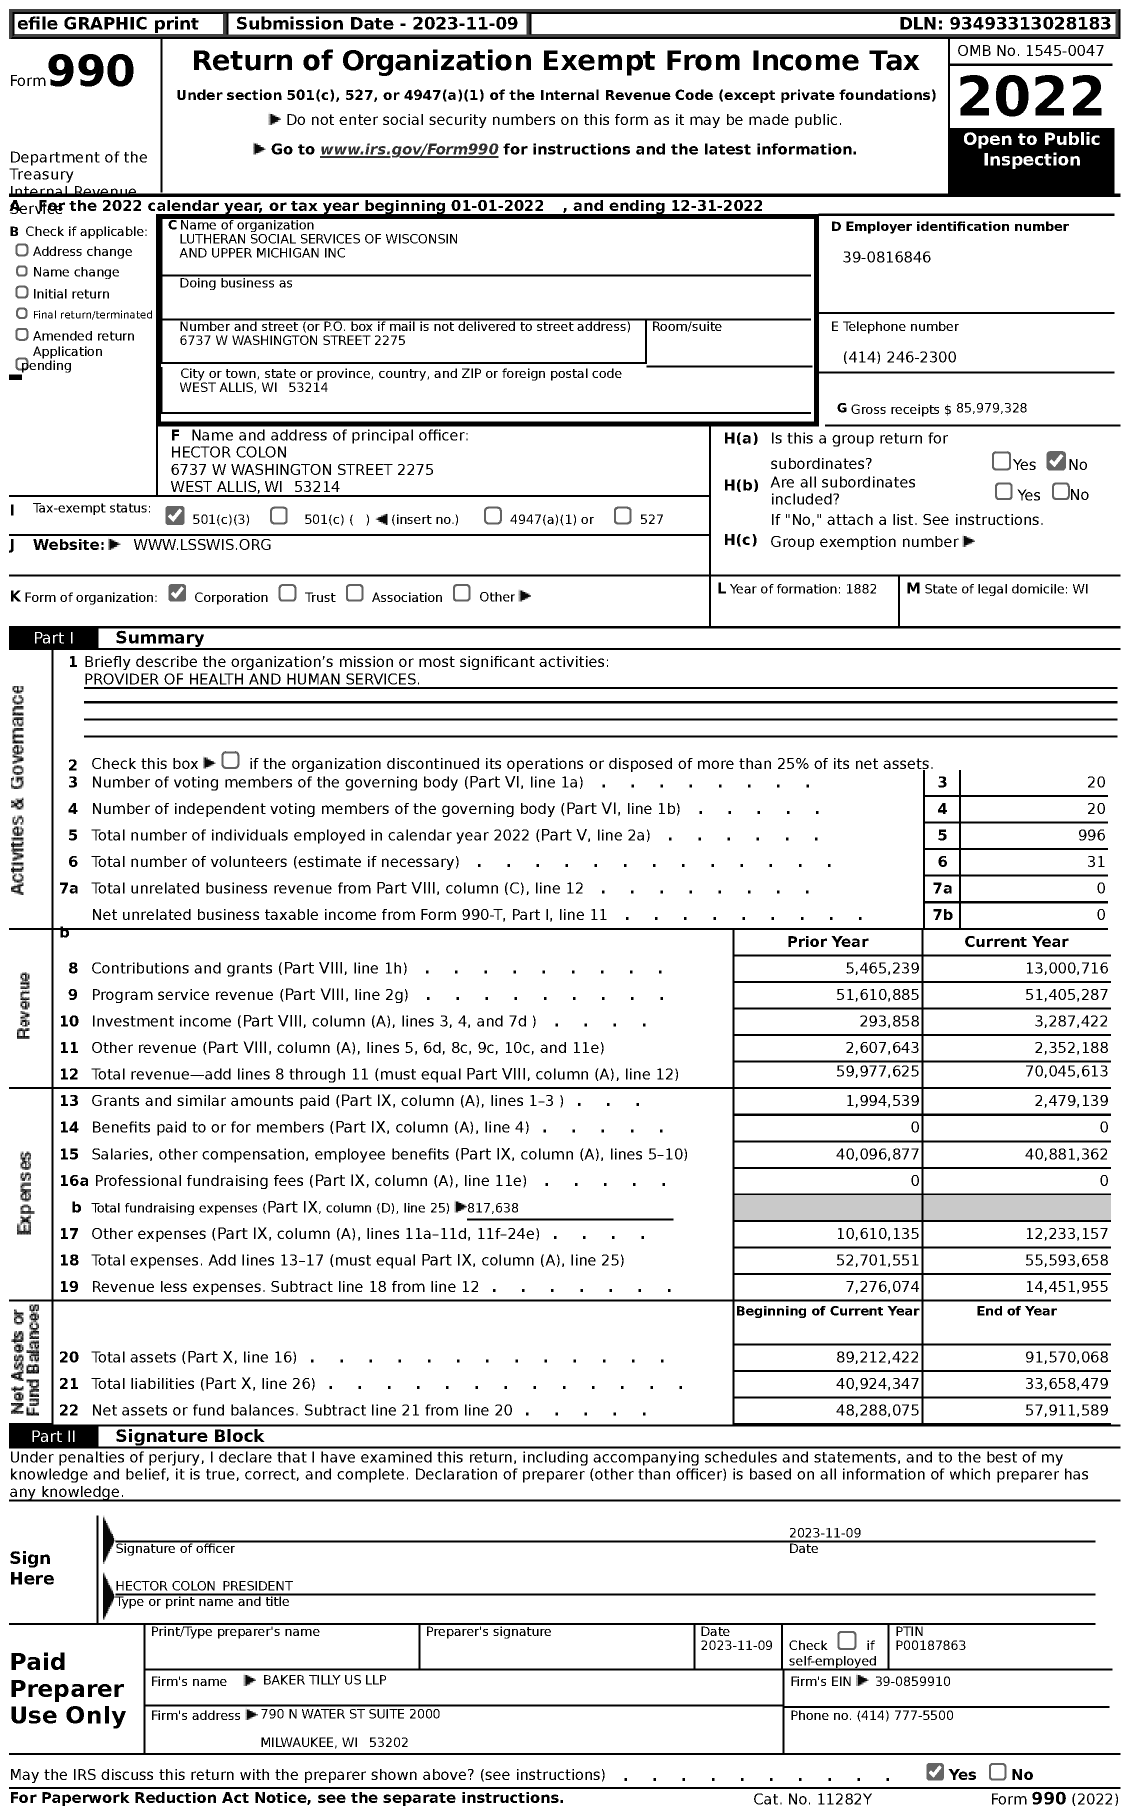 Image of first page of 2022 Form 990 for Lutheran Social Services of Wisconsin and Upper Michigan (LSS)